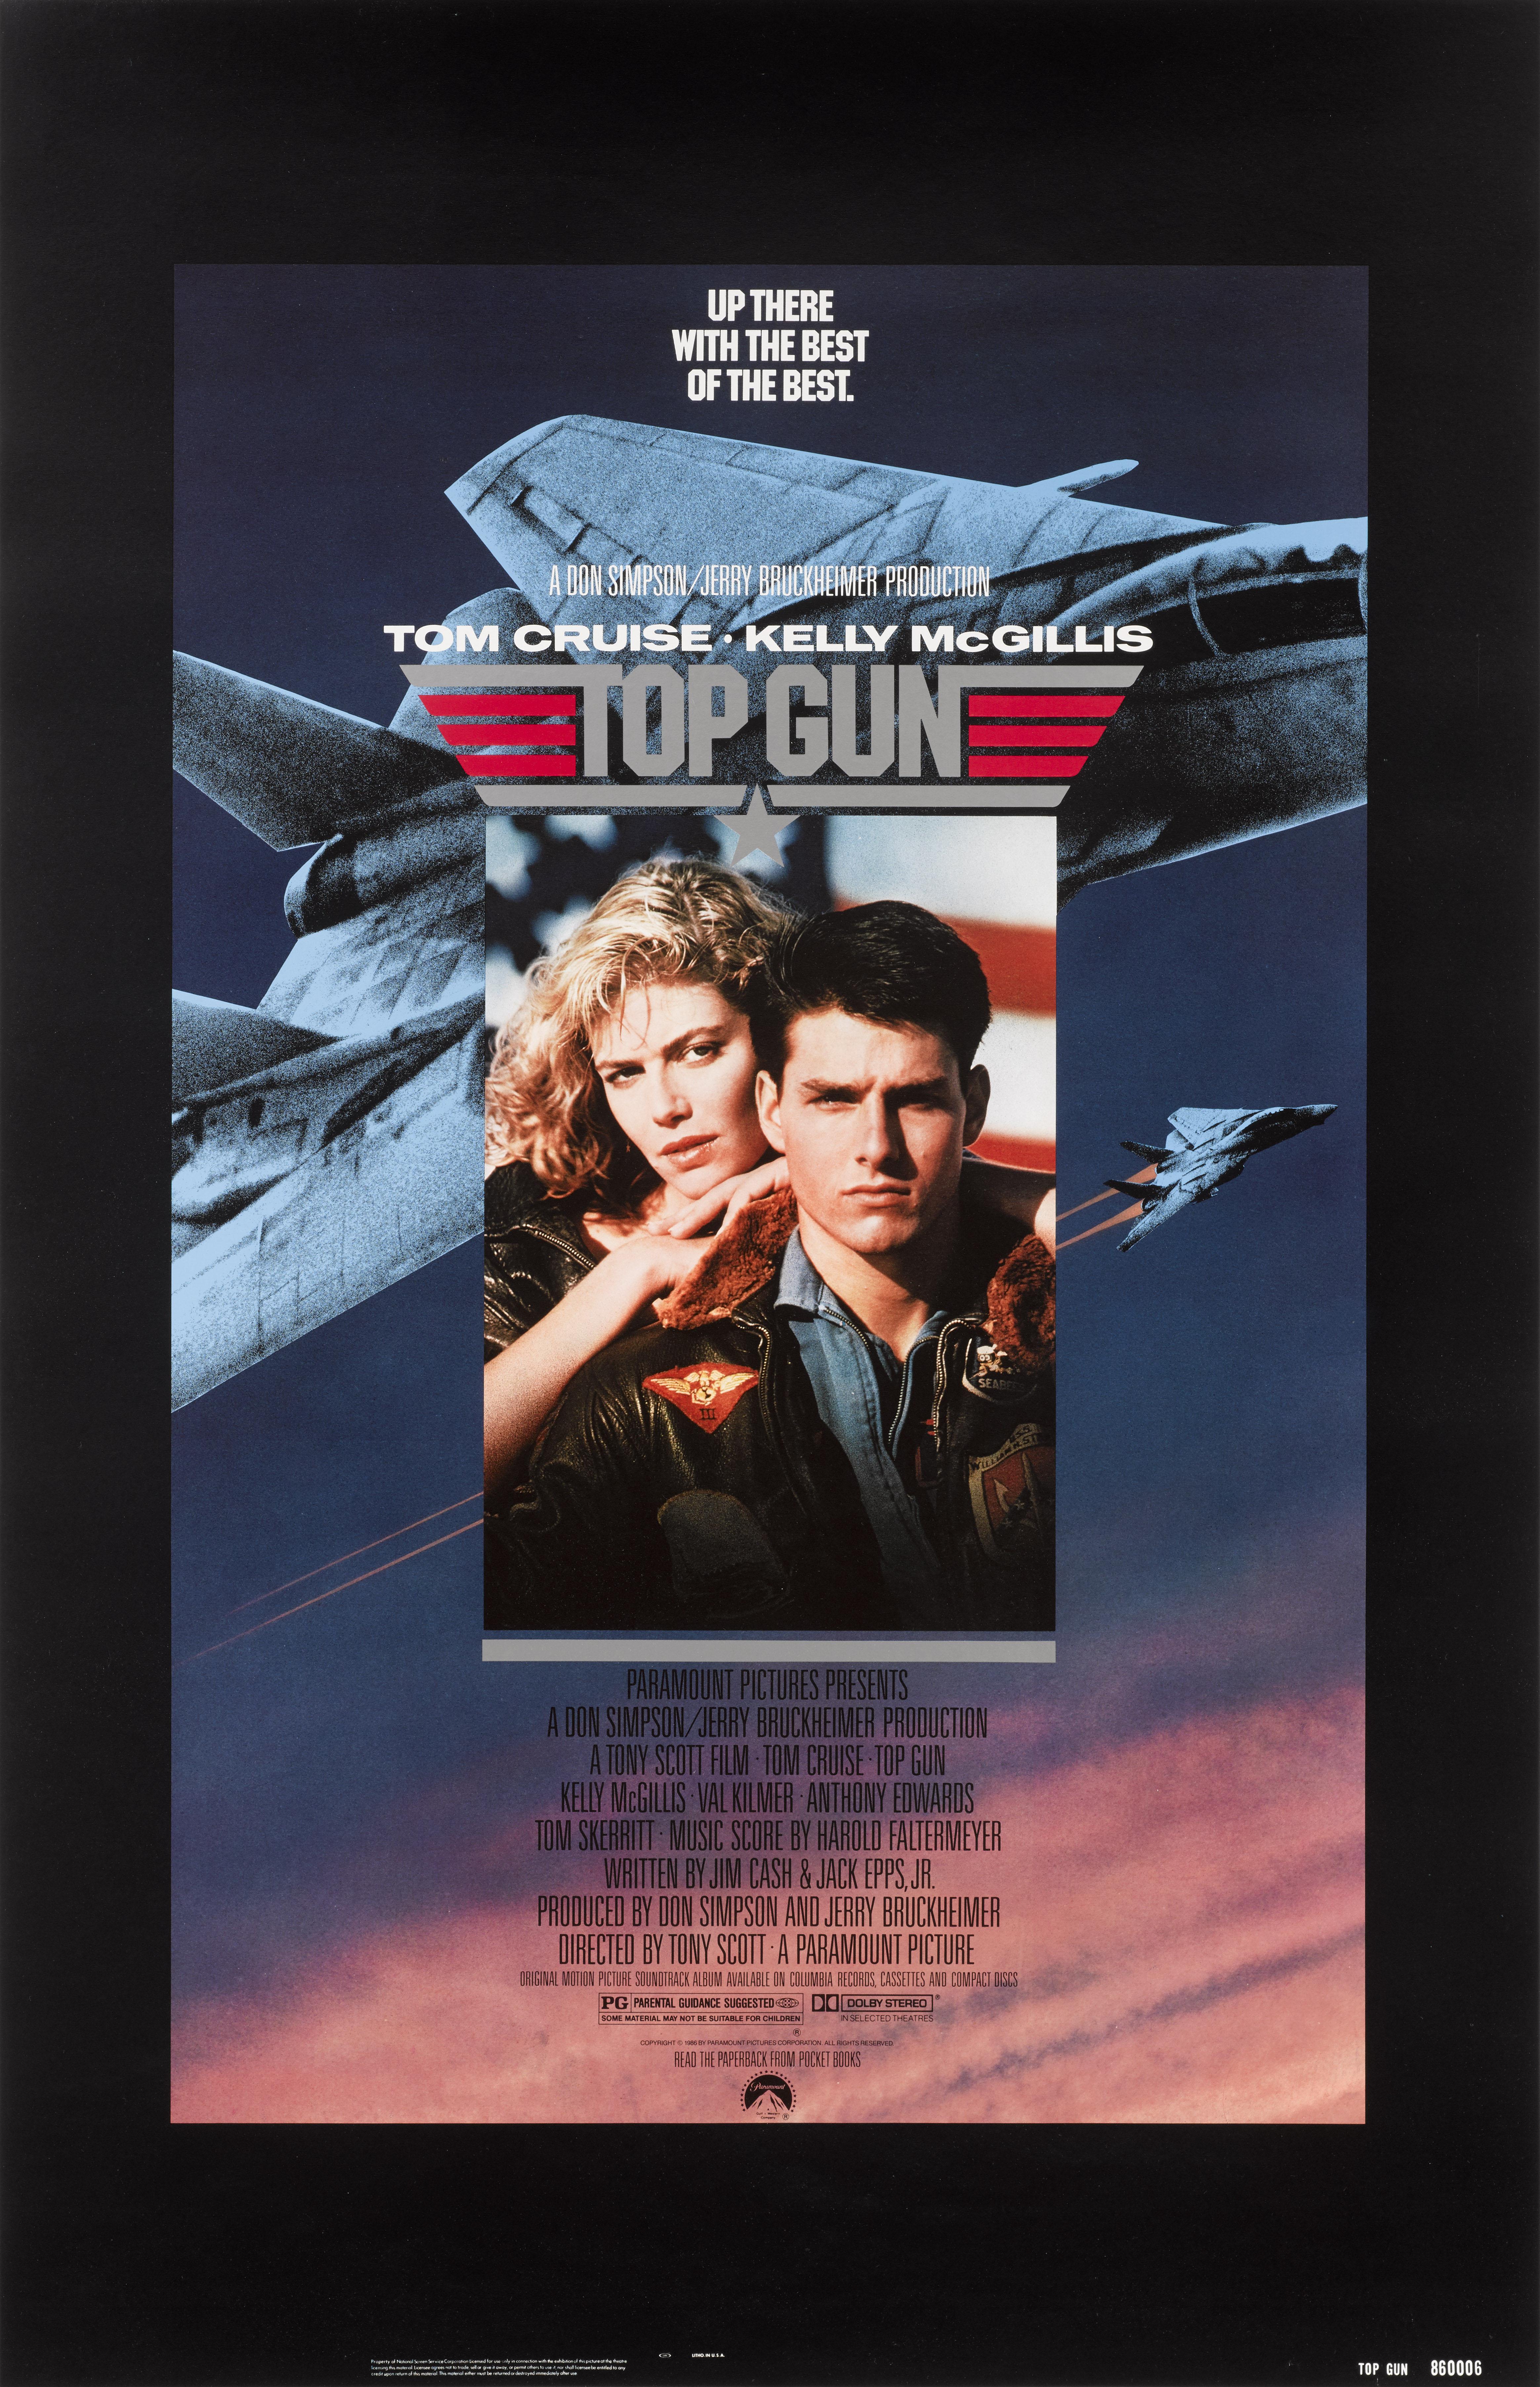 Original US film poster for the 1986 Blockbuster Top Gun starring Tom Cruise, Kelly McGillis, Tim Robbins, Val Kilmer and Michael Ironside.
This film was directed by Tony Scott.
This poster was distributed rolled and folded this is one of the